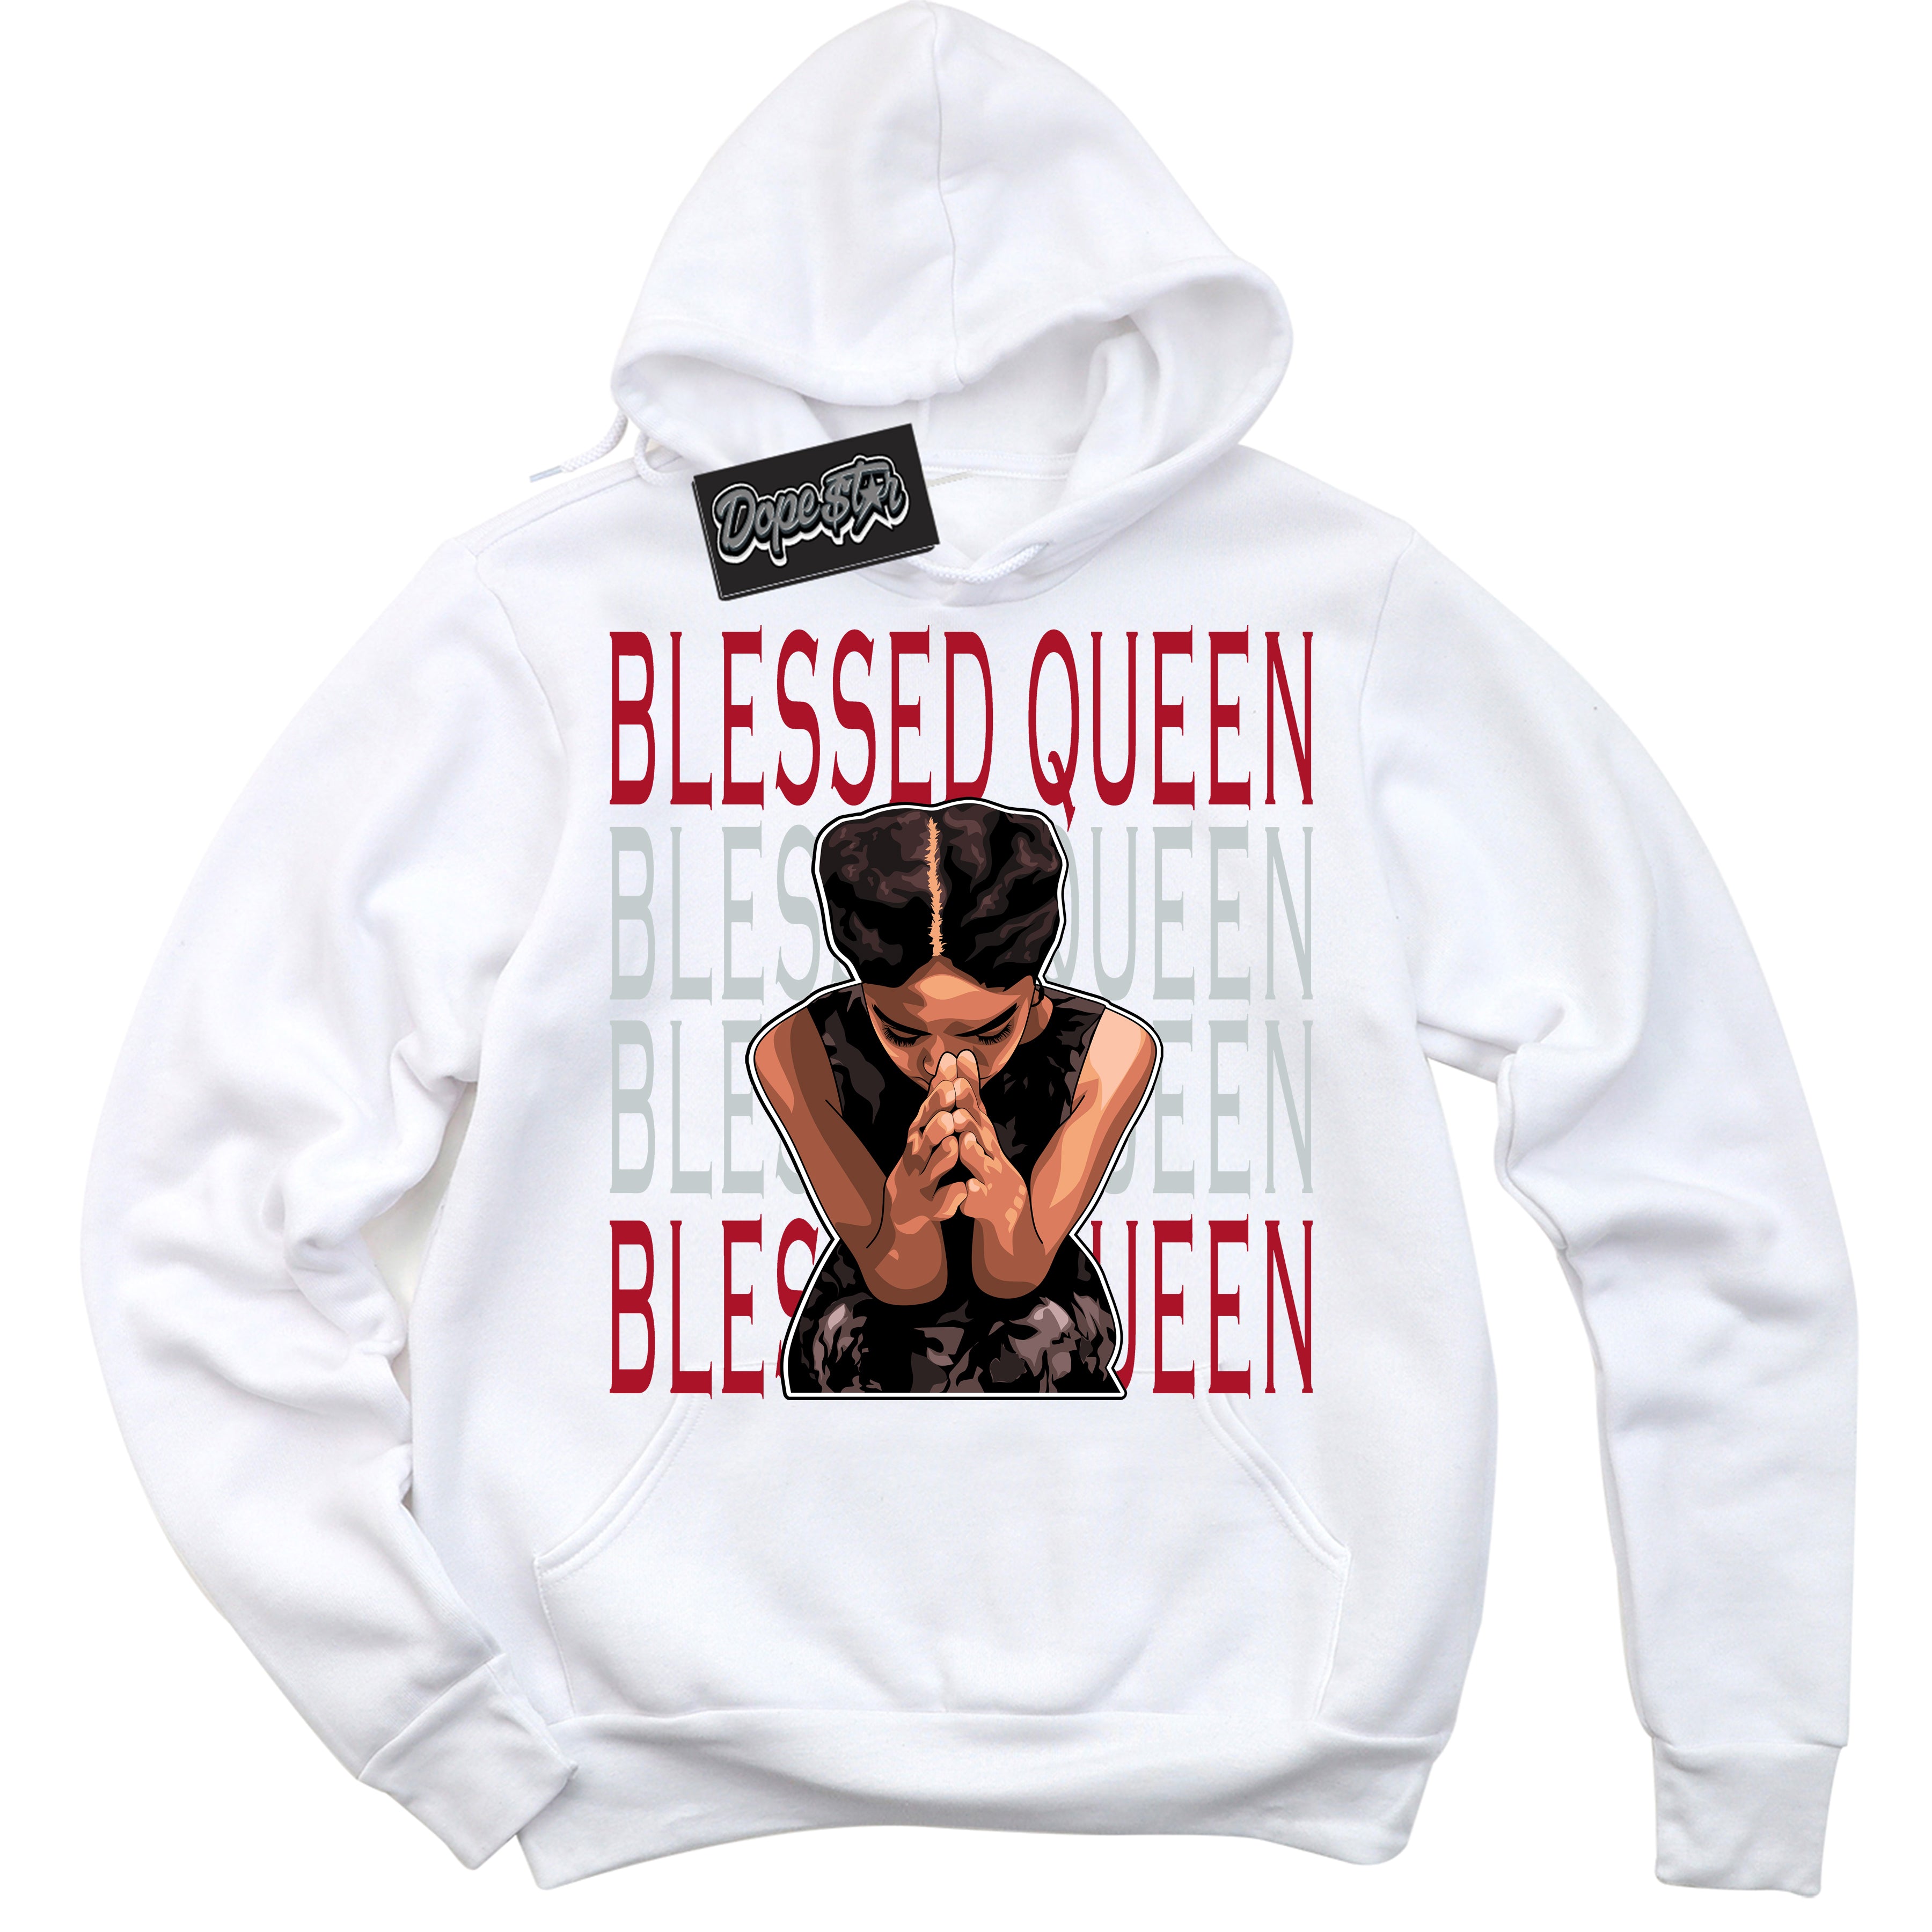 Cool White Hoodie with “ Blessed Queen ”  design that Perfectly Matches Reverse Ultraman Sneakers.